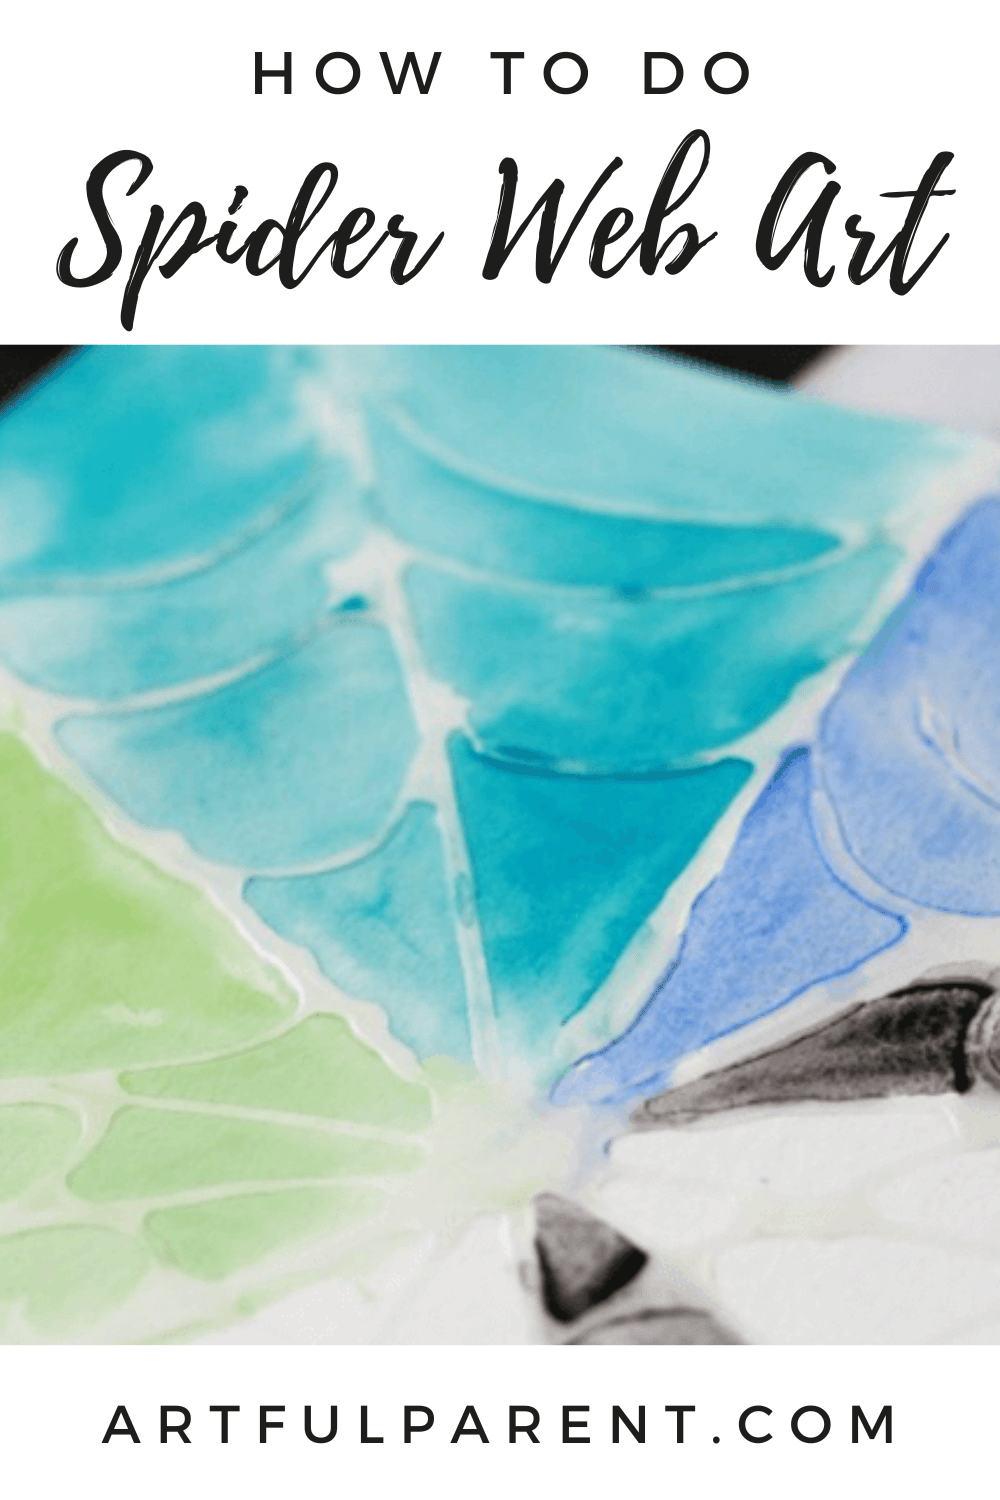 How to Do Halloween Spider Web Art